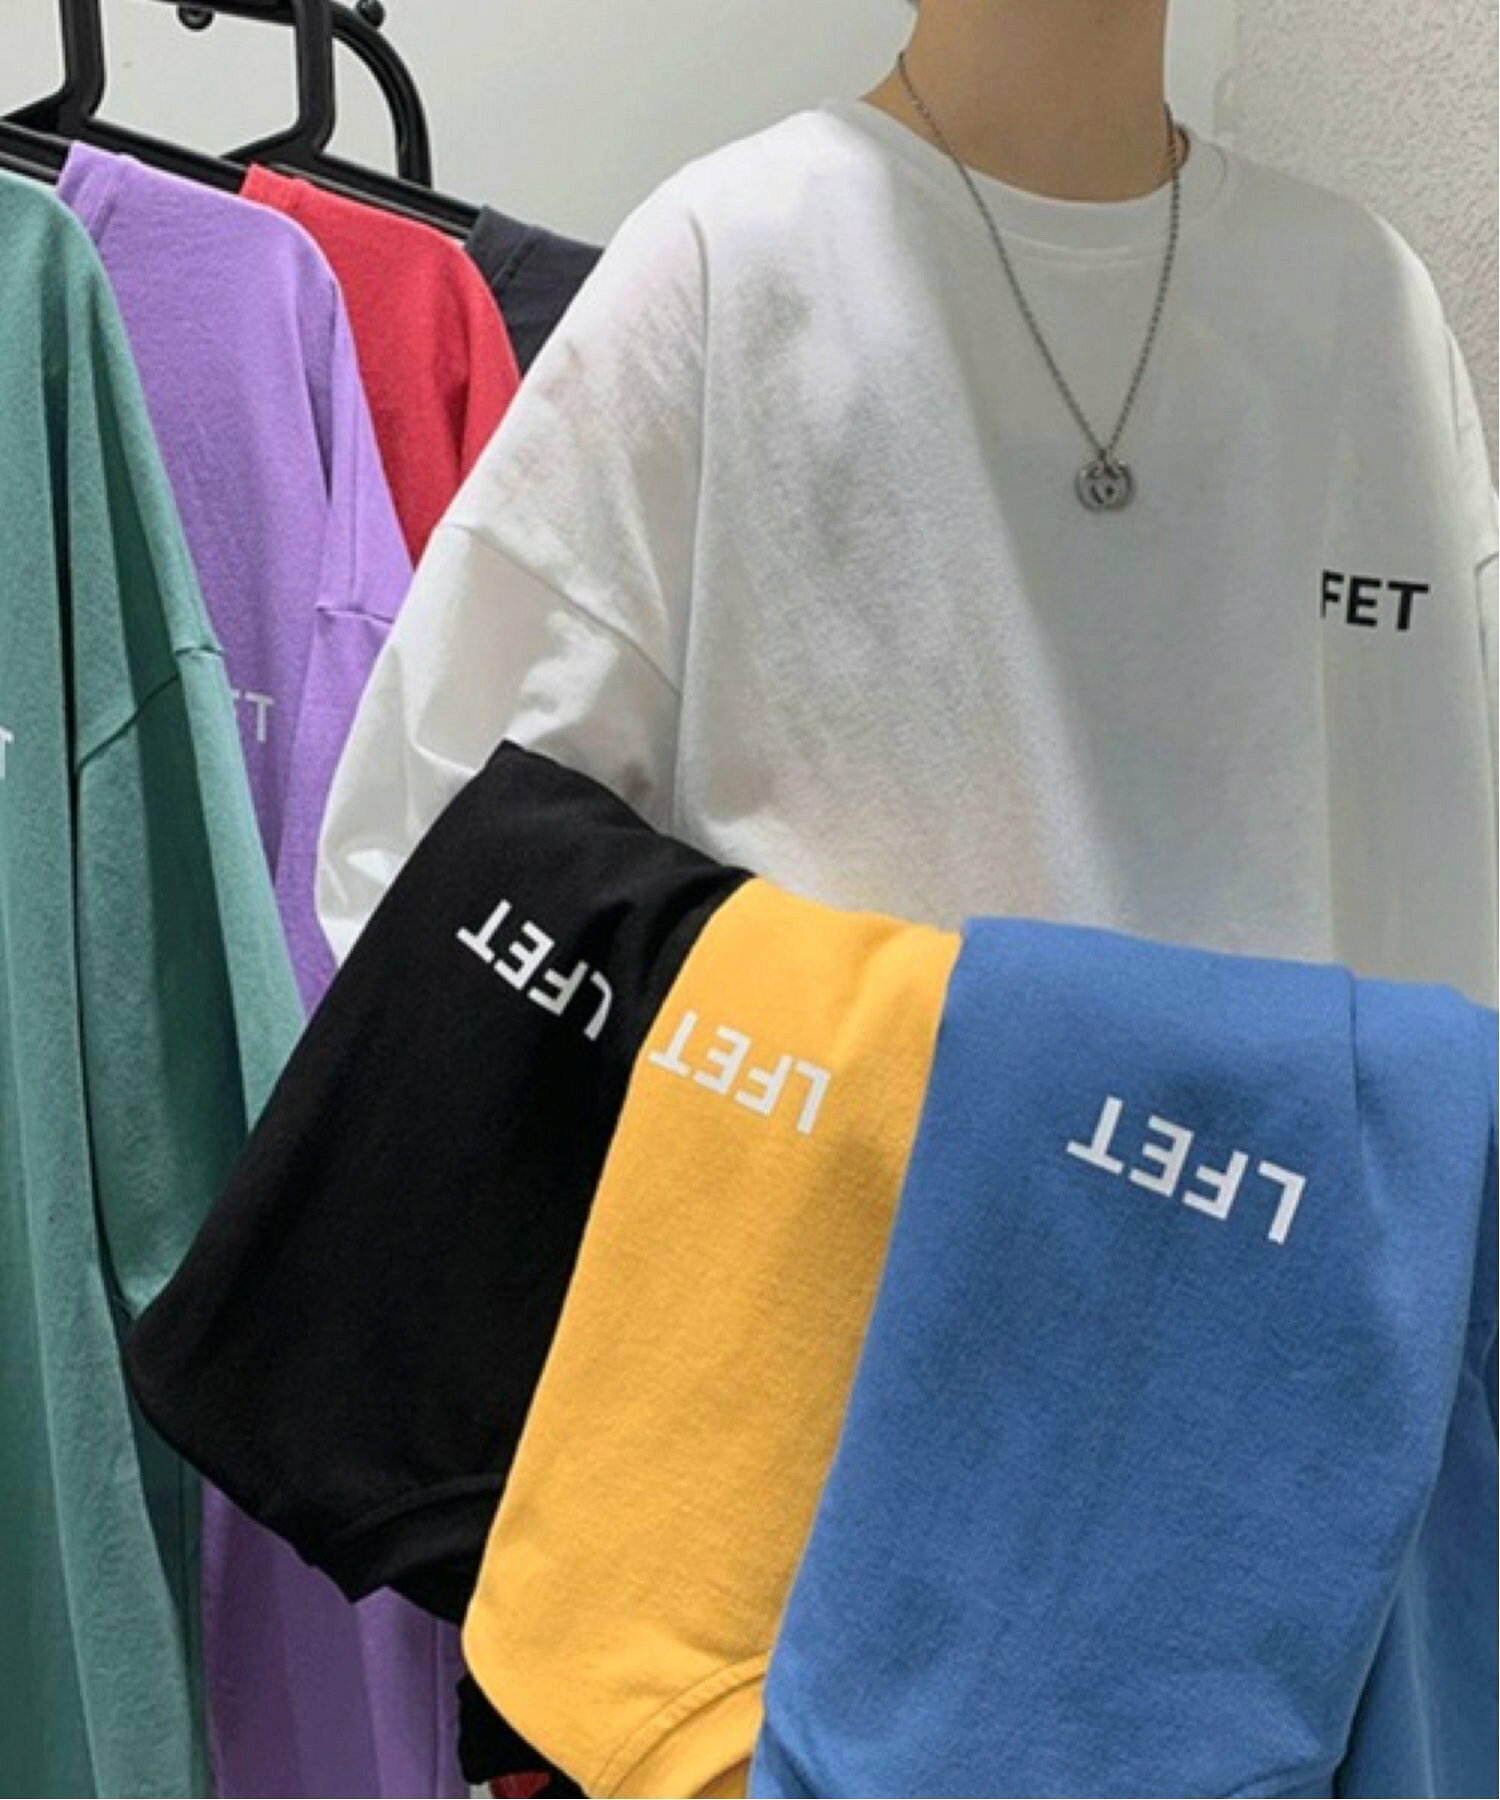 NOWLE/(M)【NOWLE】ルーズシルエット ワンポイント 半袖 Tシャツ